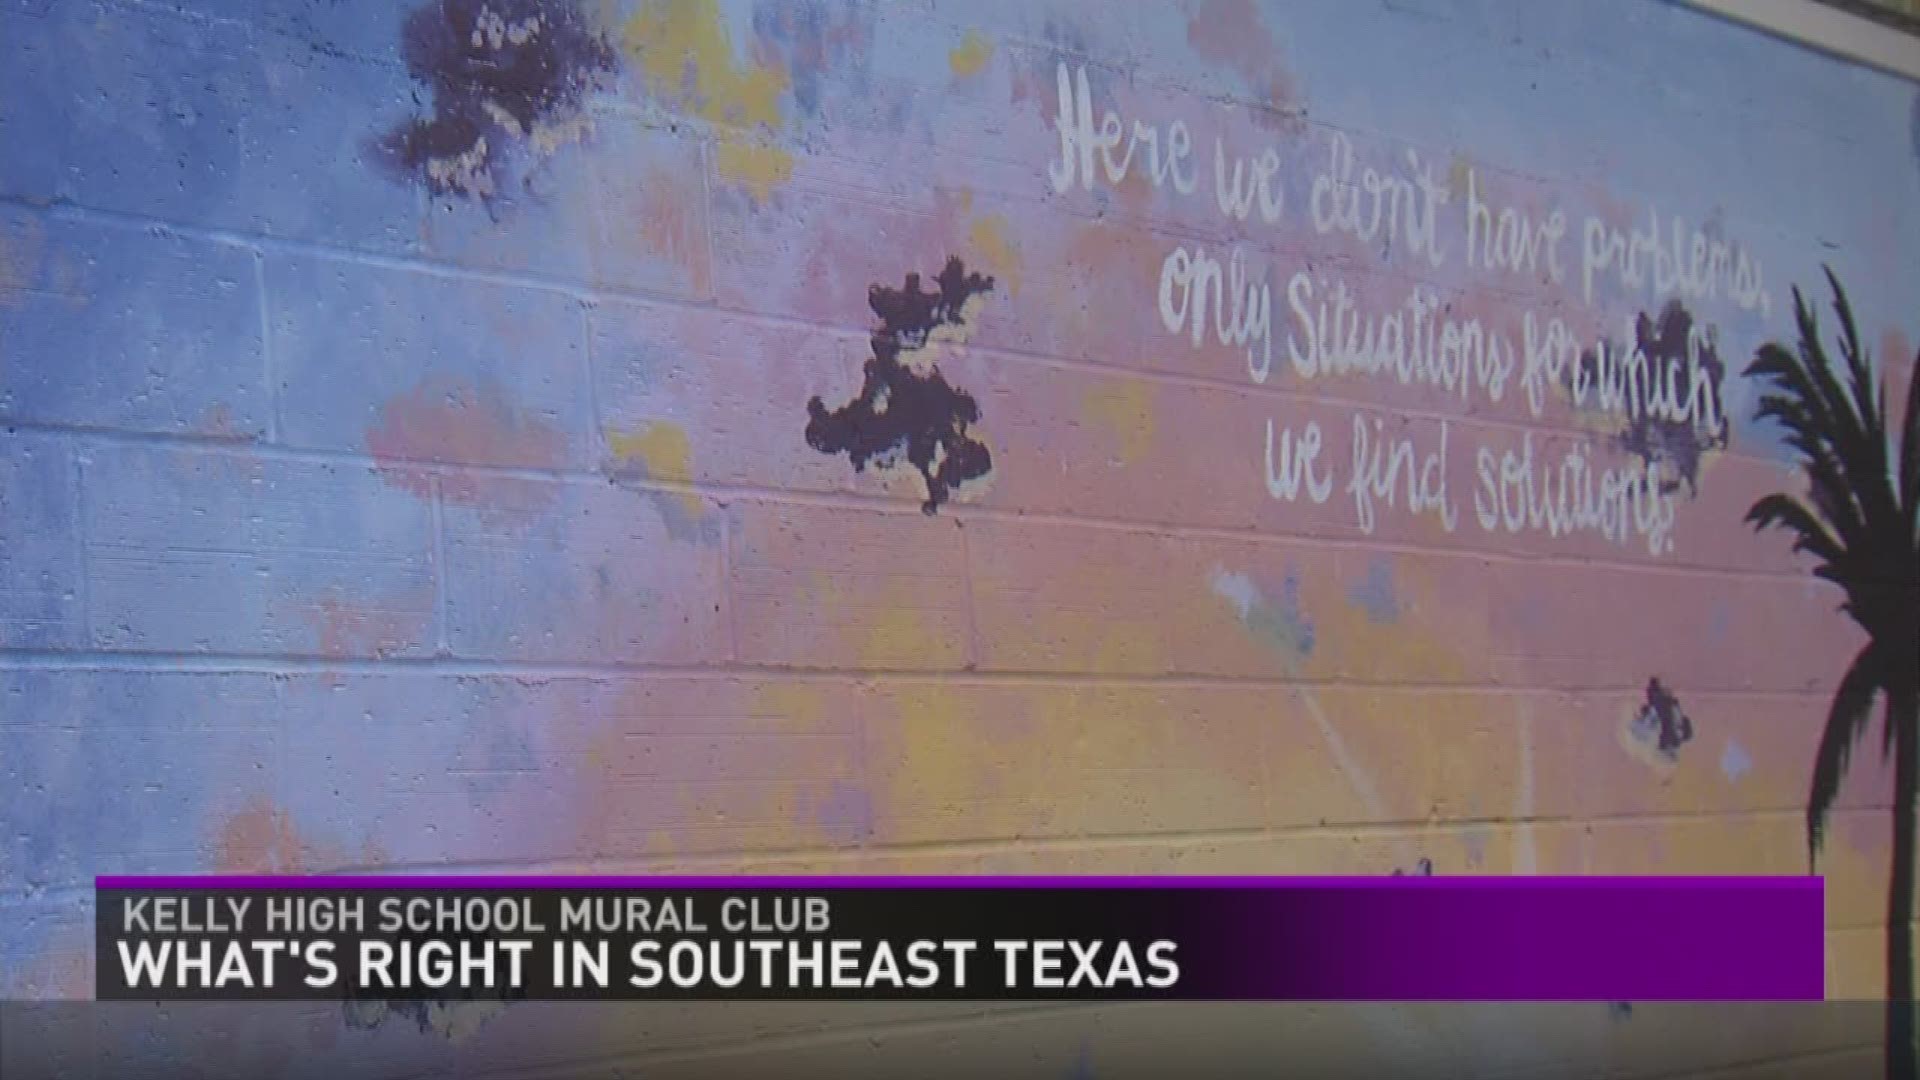 This week the Kelly High School Mural Club is "what's right in Southeast Texas."